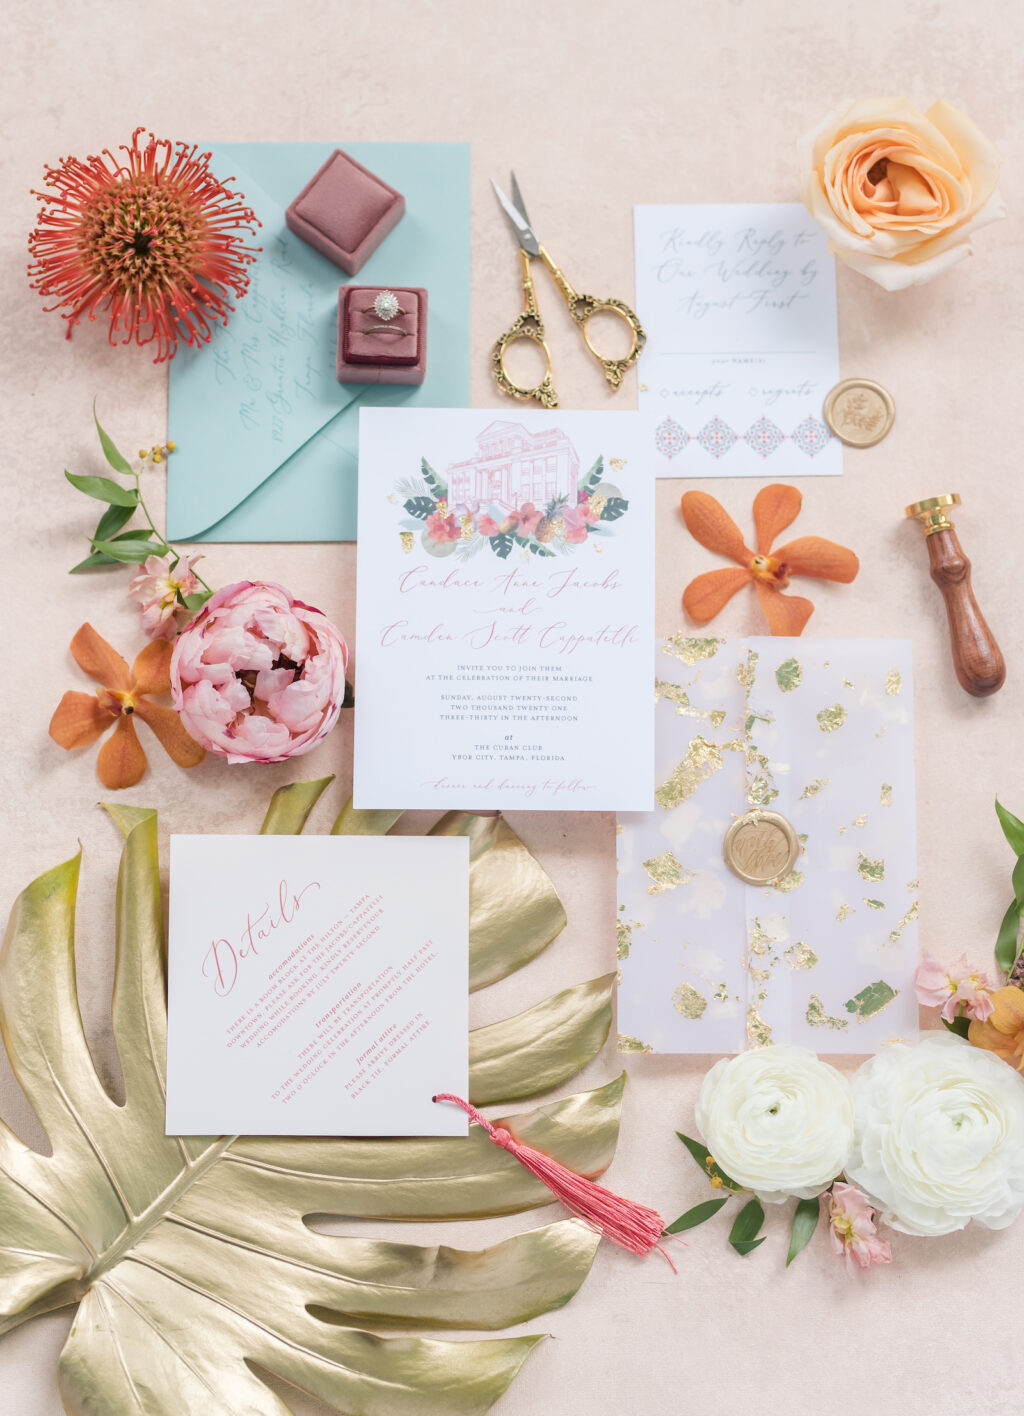 Colorful and Floral Wedding Invitation Suite with Watercolor Wedding Venue Historic Tampa The Cuban Club Design, Gold Painted Monstera Leaf, Pink Pin Cushion Protea, Pink Garden Rose, Engagement Ring in Mauve Ring Box | Tampa Bay Wedding Planner Eventfull Weddings